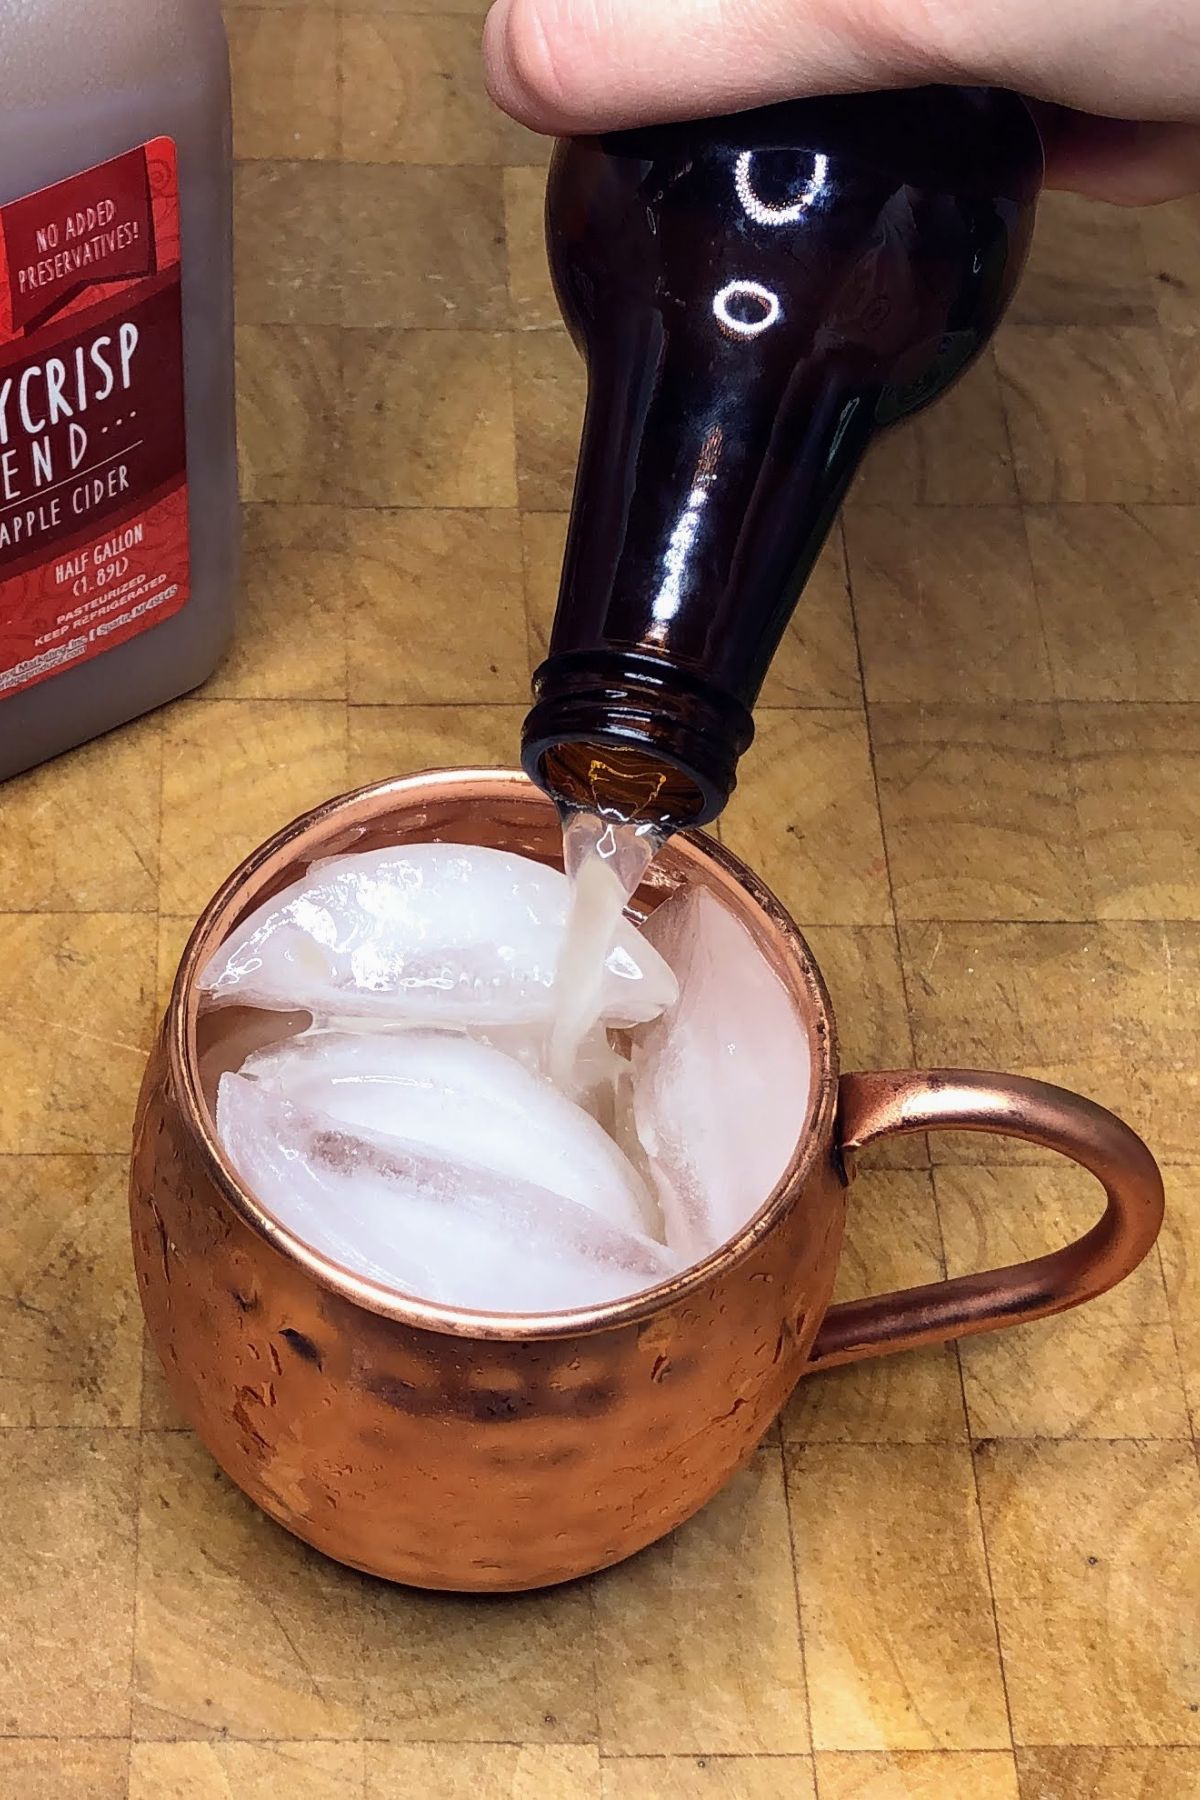 Pouring ginger beer from the bottle into a copper mug.